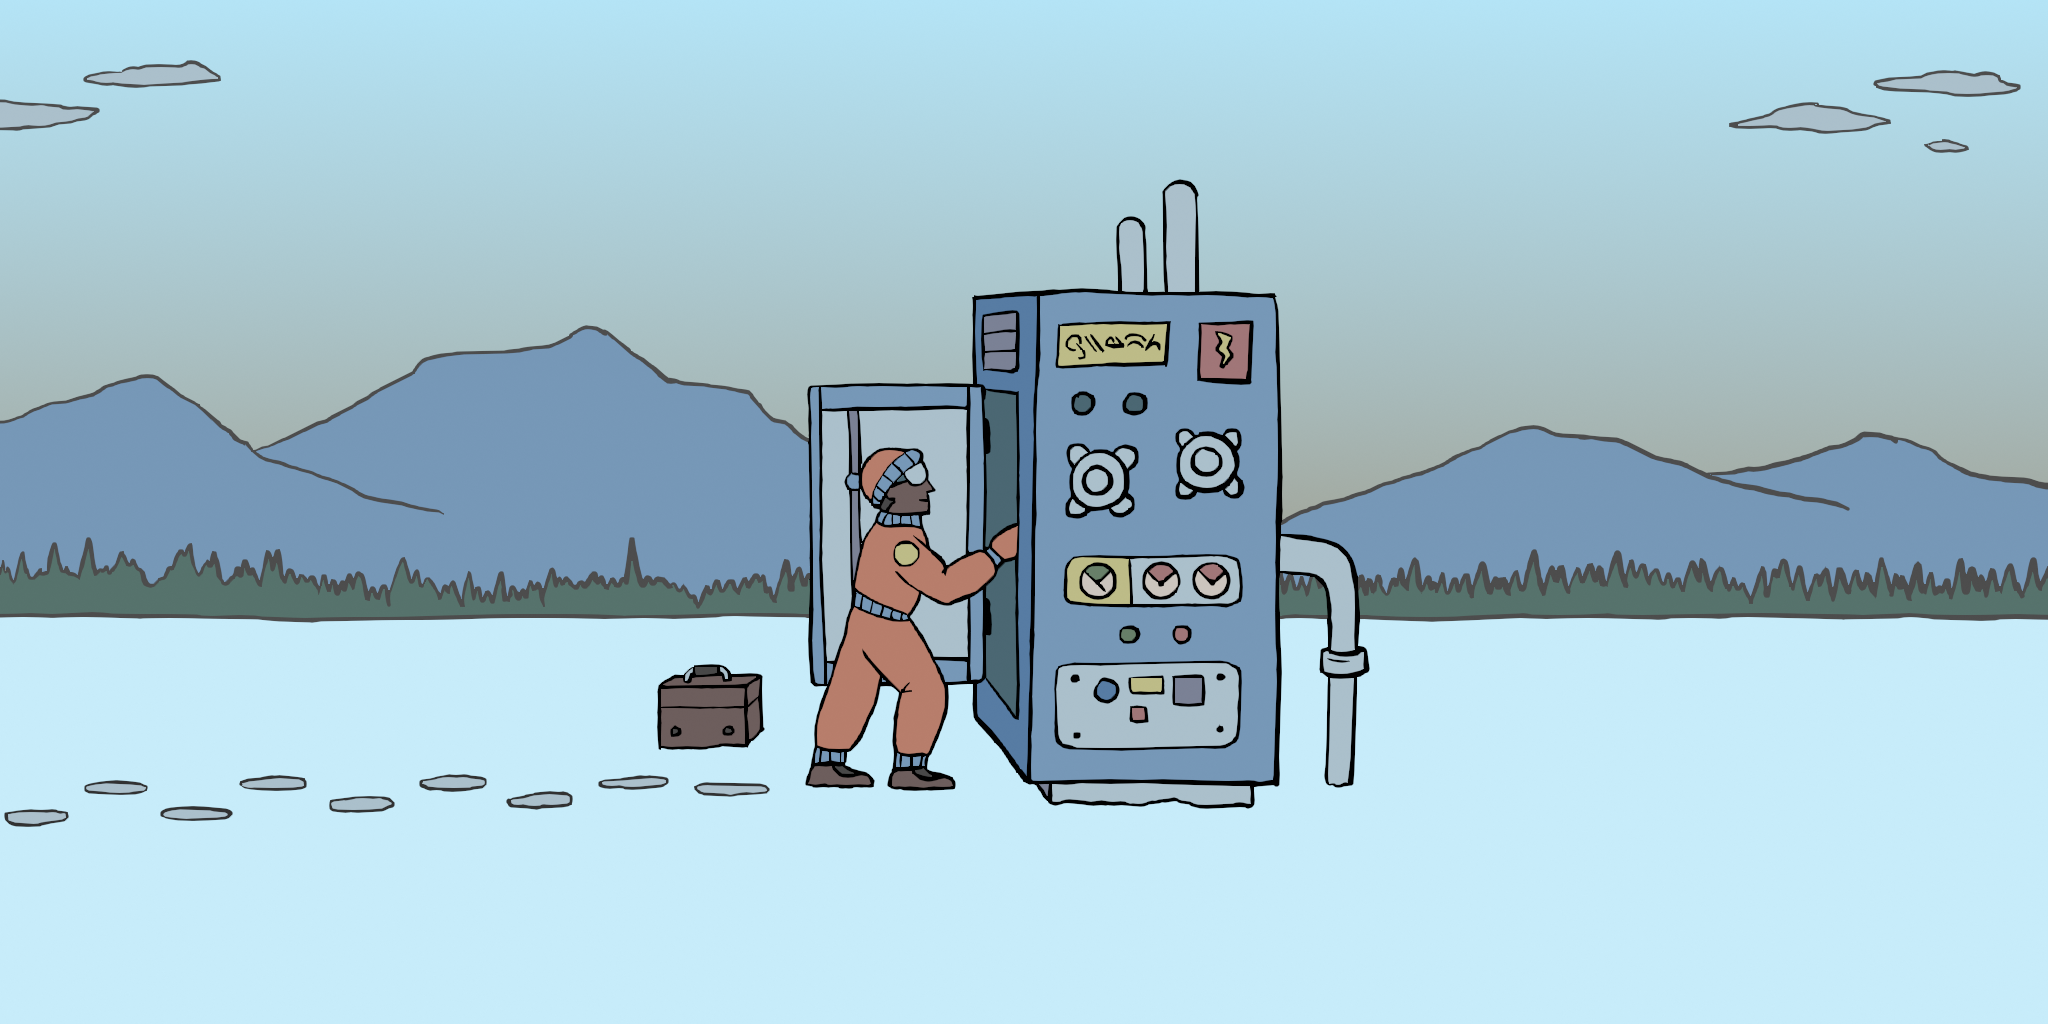 a digital drawing of a mechanic servicing a machine in a snowy fields